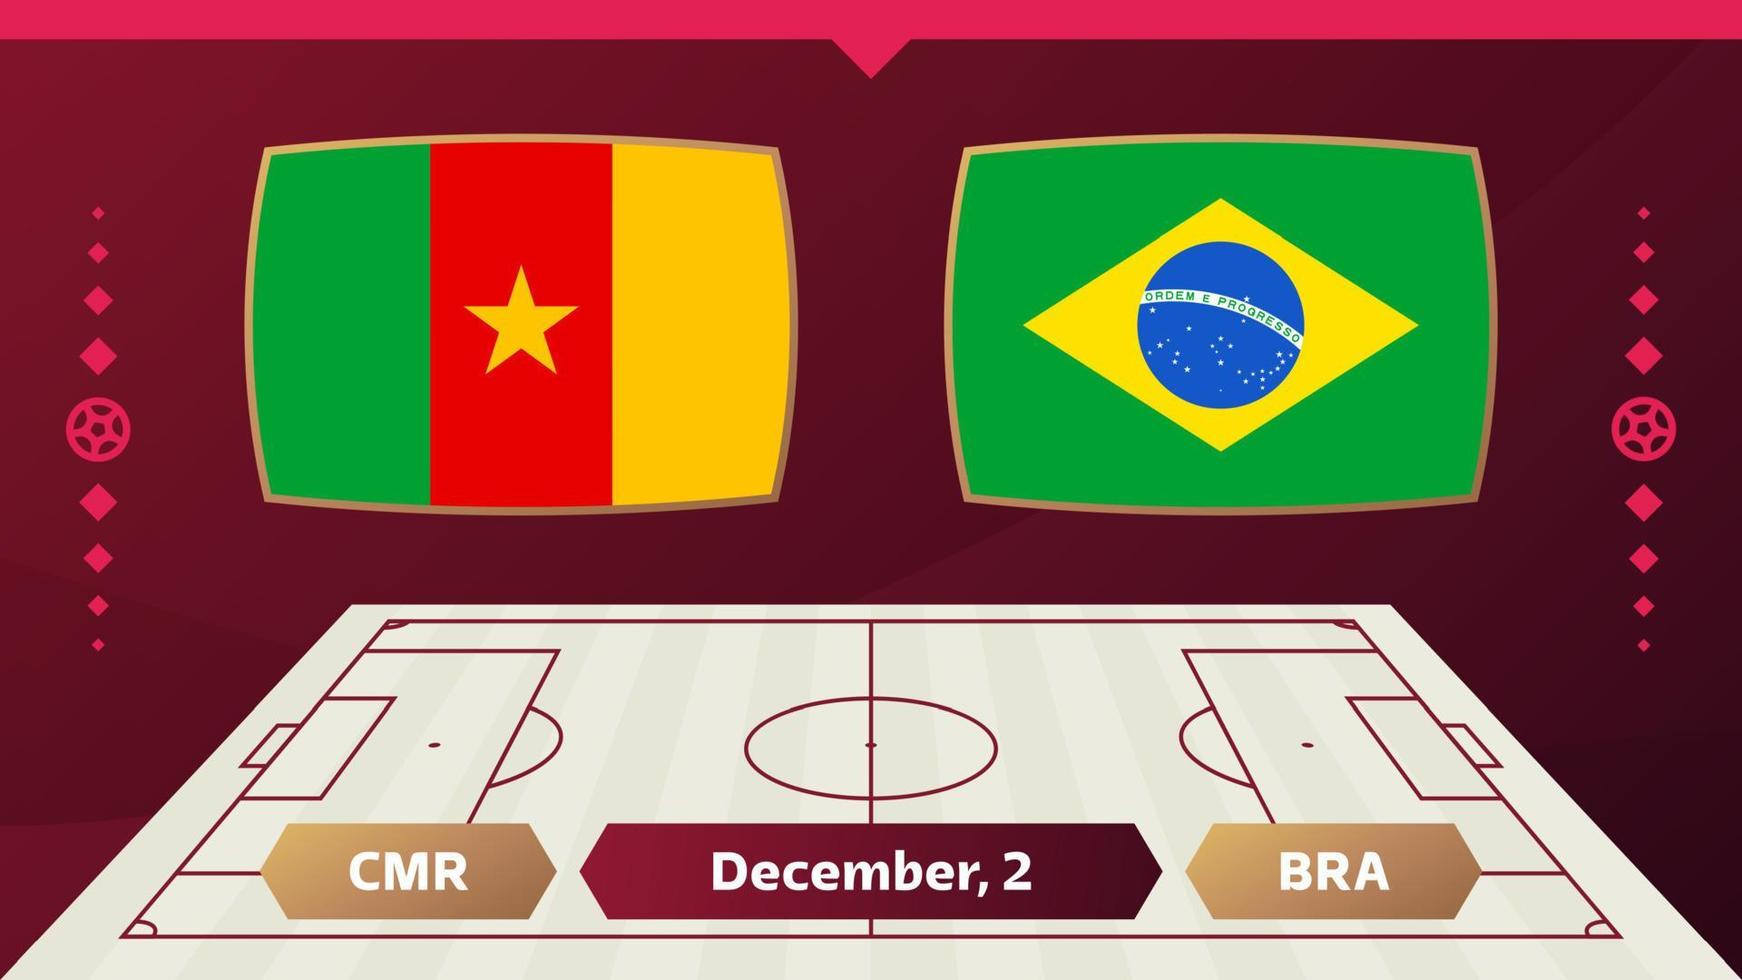 Cameroon vs Brazil, Football 2022, Group G. World Football Competition championship match versus teams intro sport background, championship competition final poster, vector illustration.